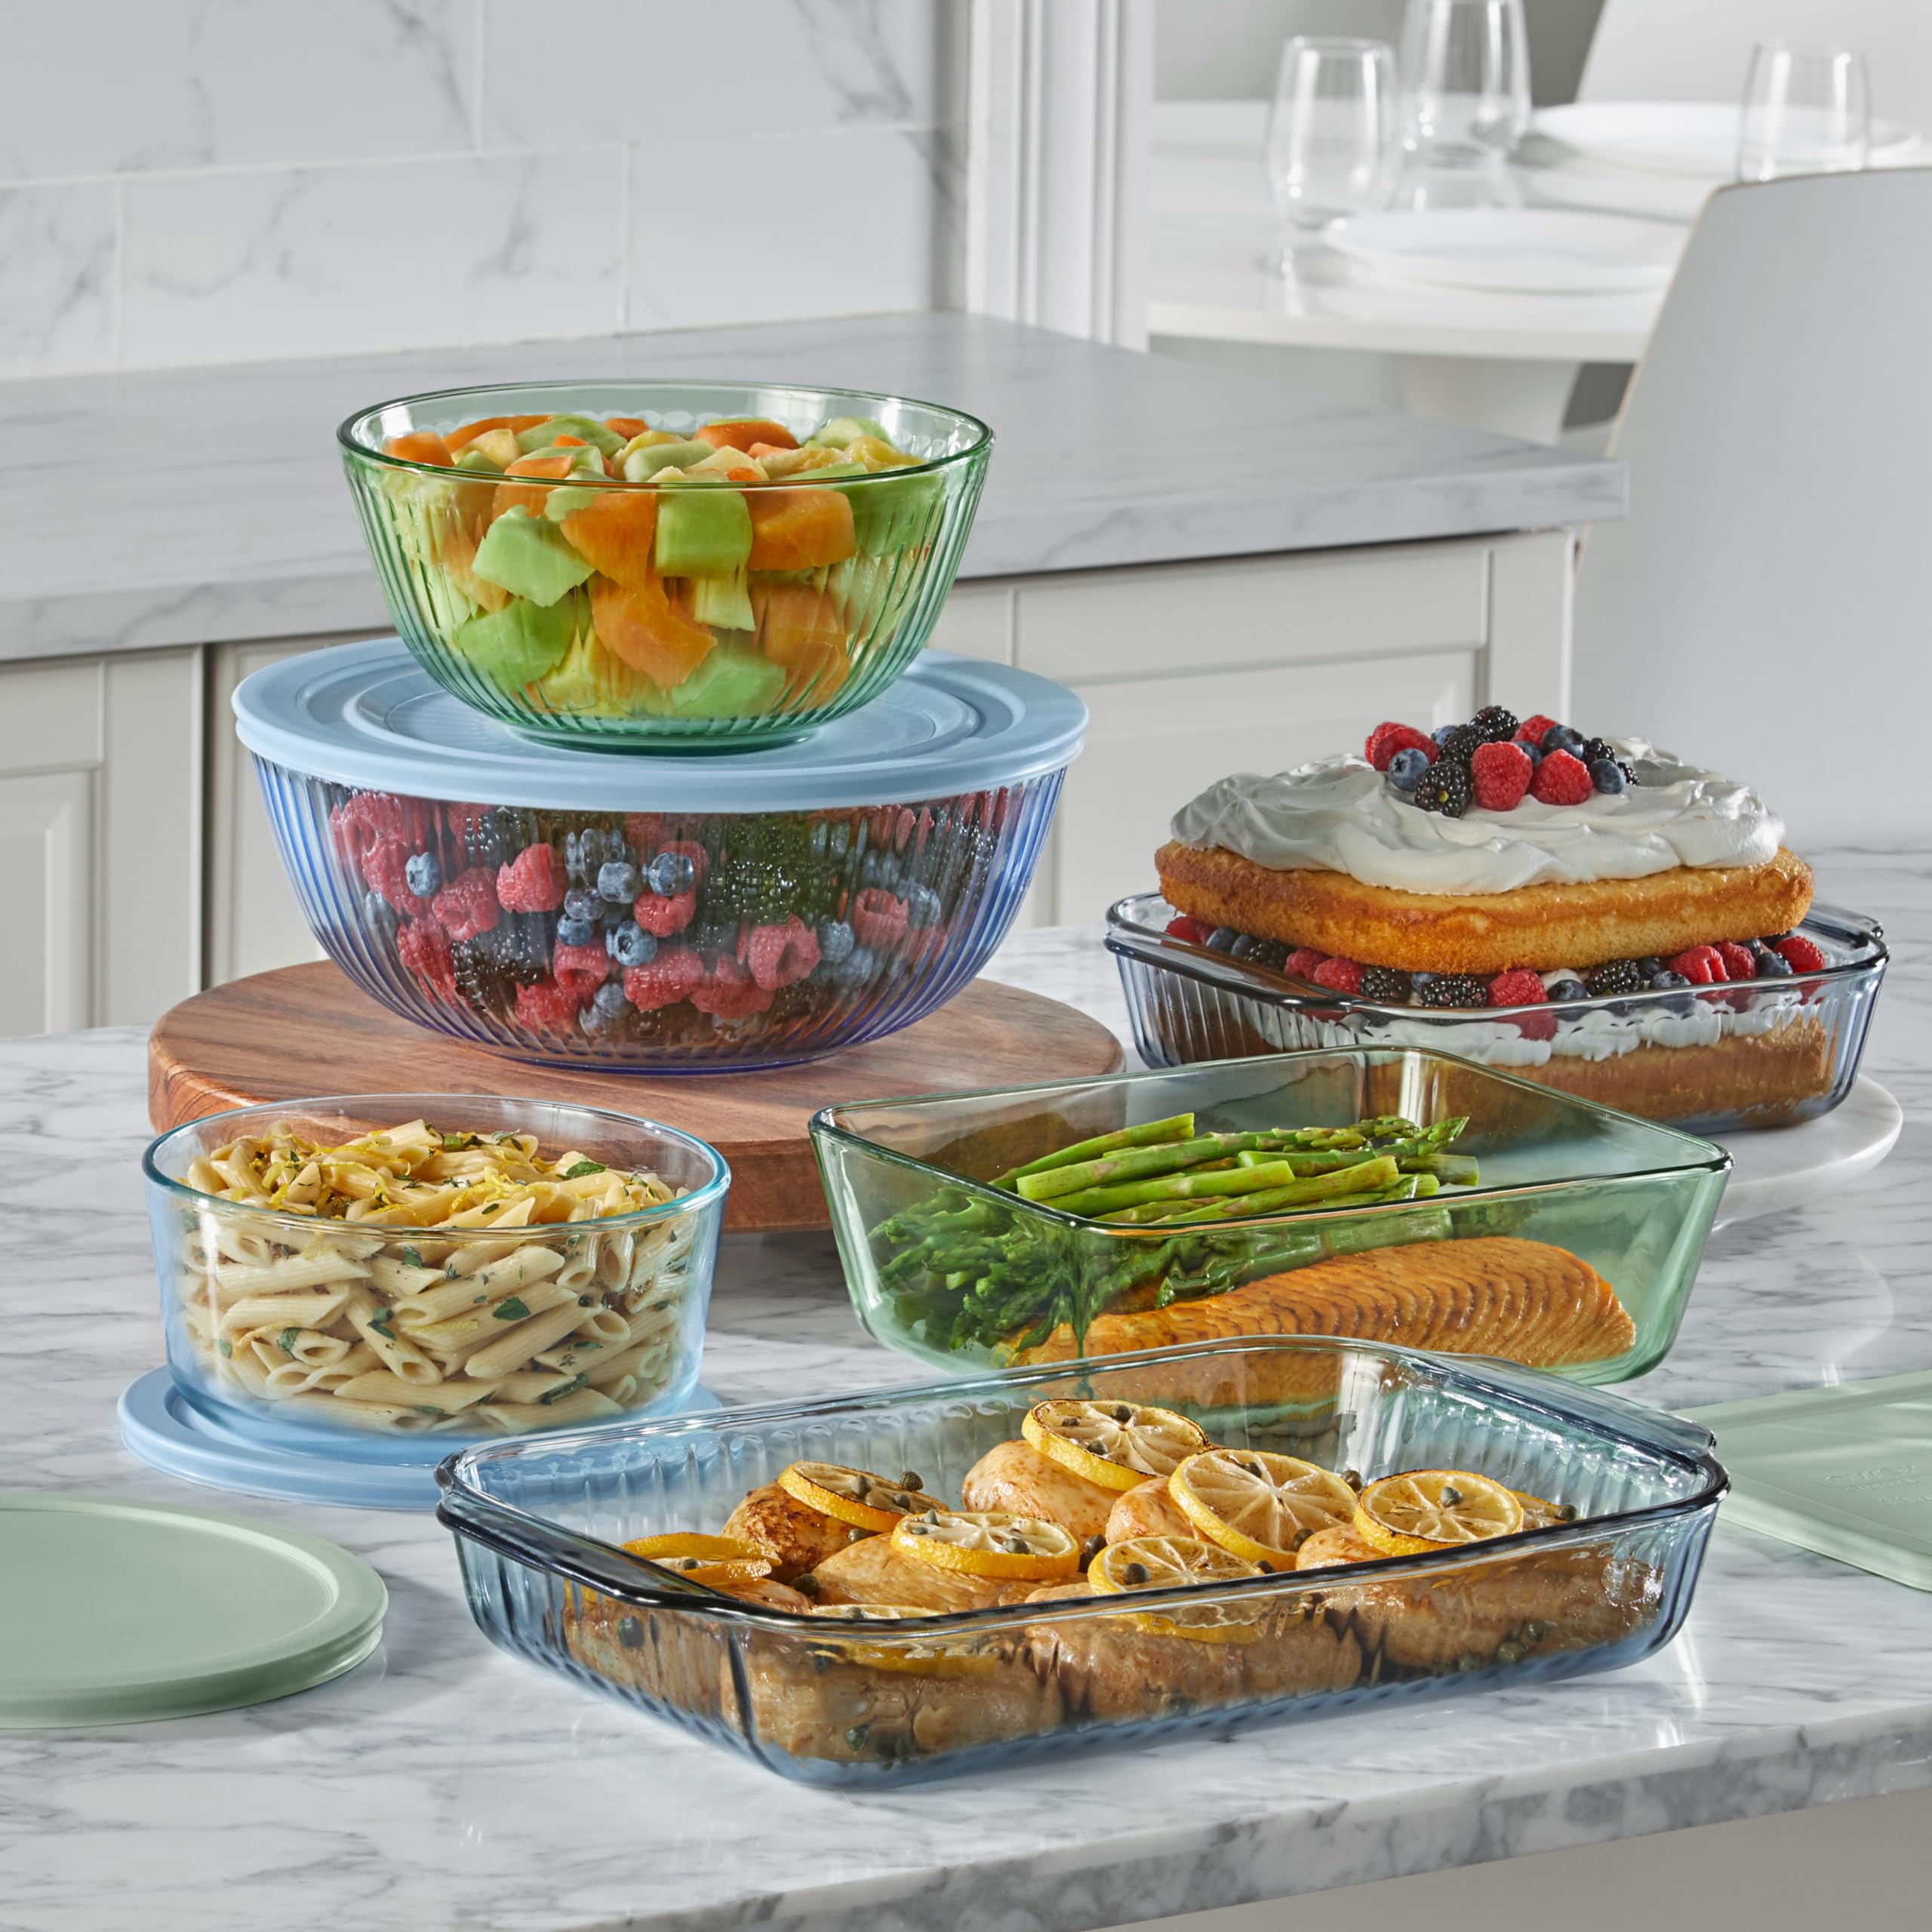 Pyrex Sculpted Tinted 6-PC Full Set, Small/Medium/Large Glass Mixing Bowls With Lids, Nesting Space Saving Set of Bowls For Prepping and Baking, 1.3QT, 2.3QT & 4.5QT